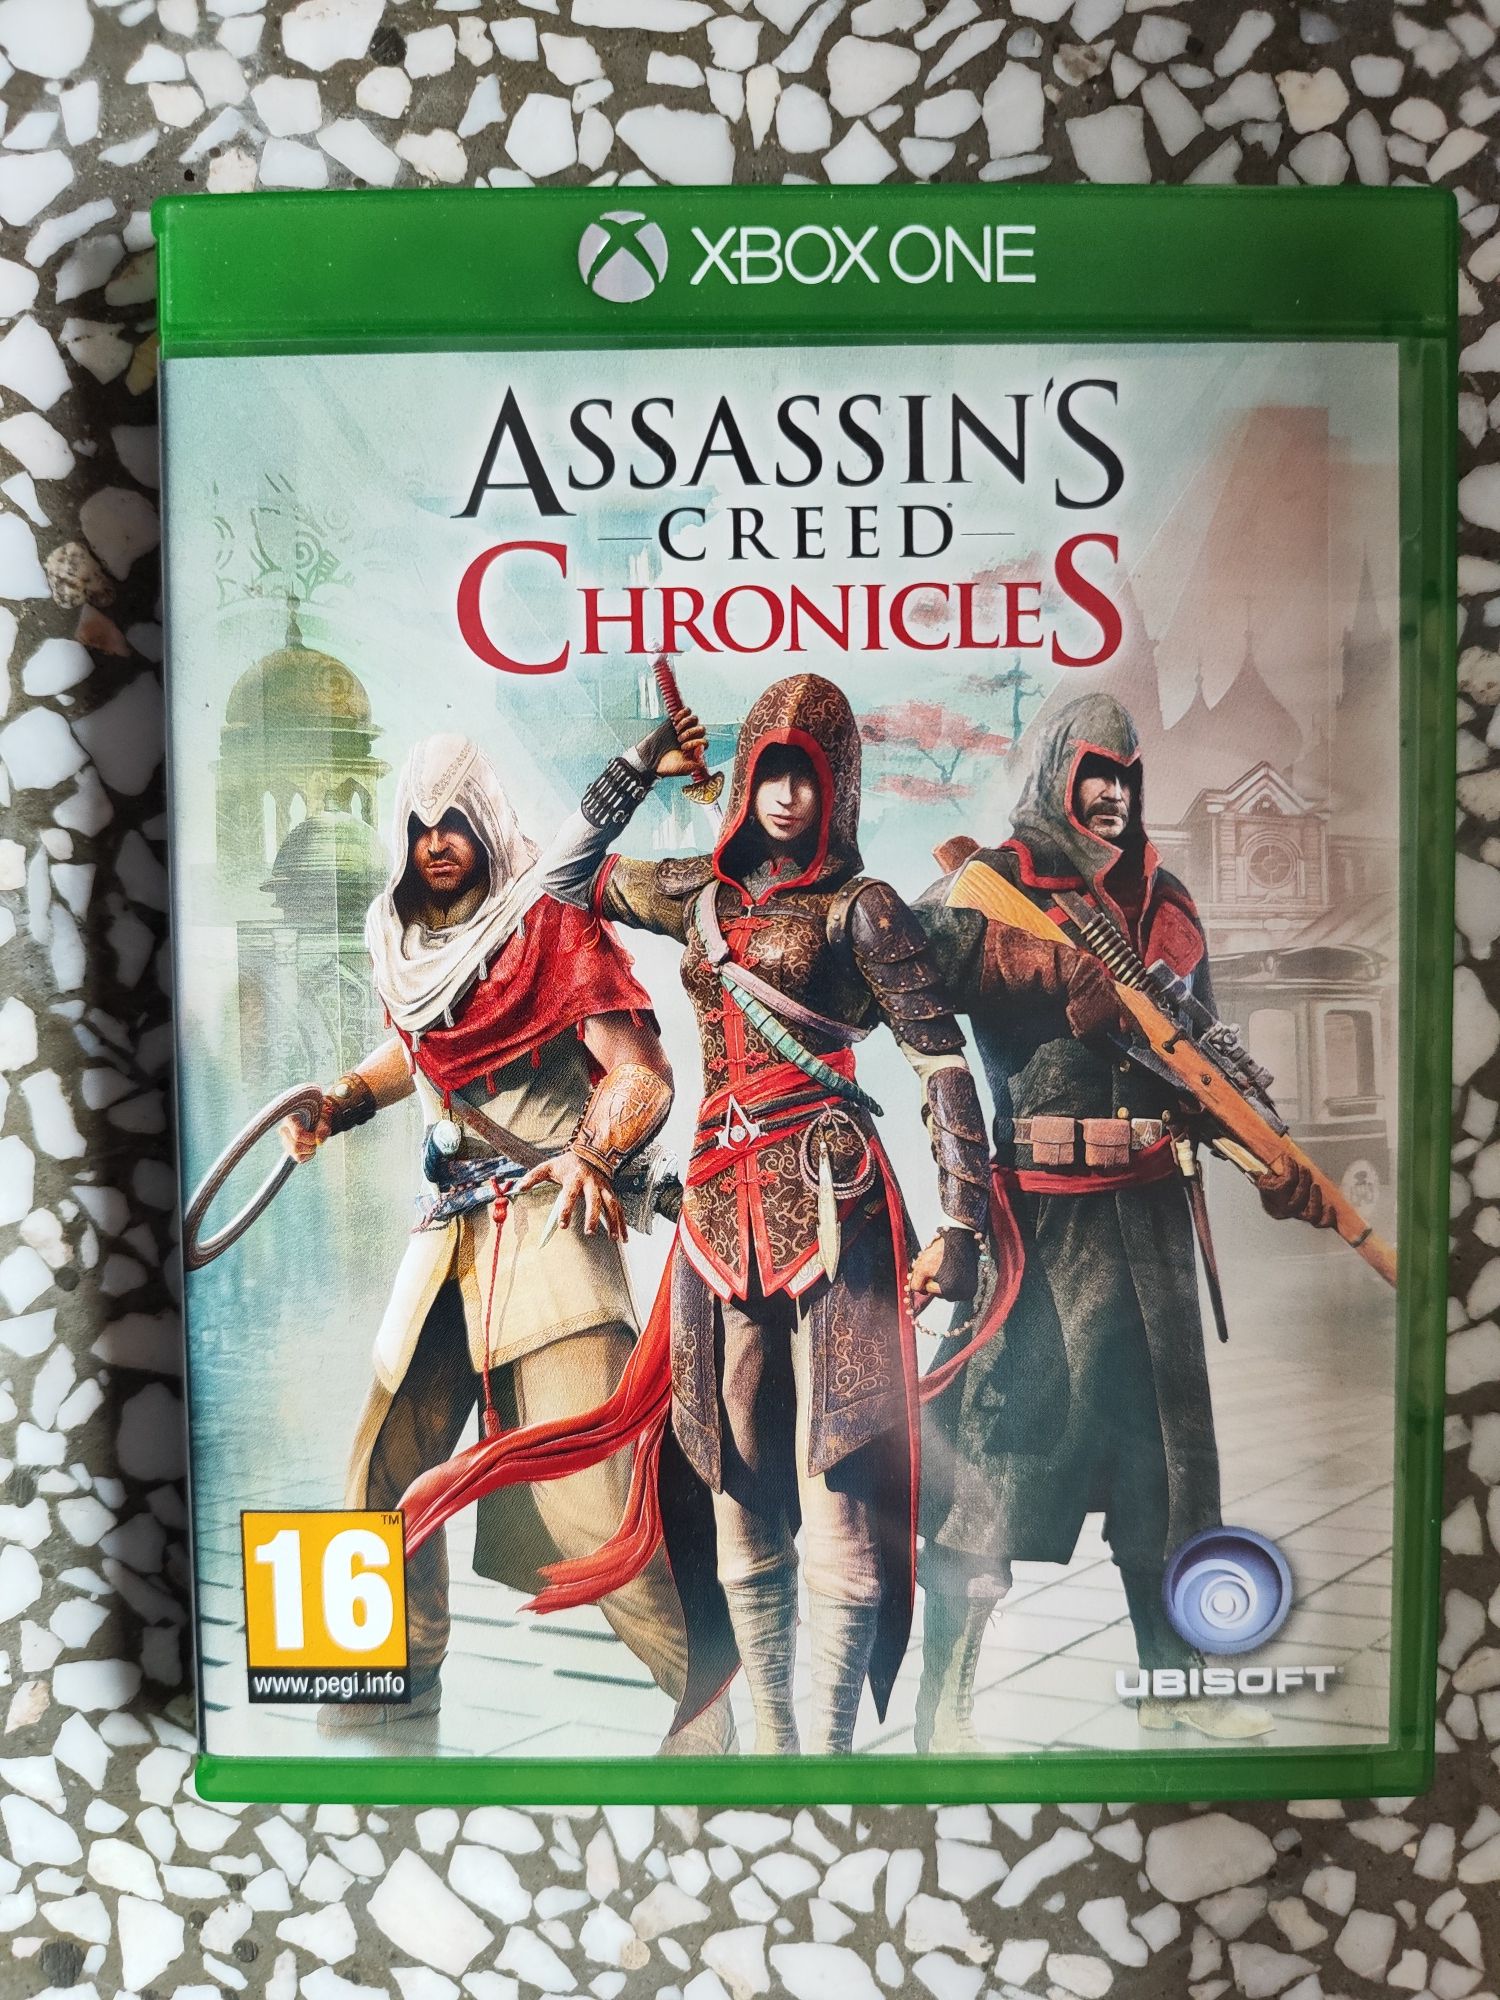 Assassin's Creed Chronicles Xbox one Series X